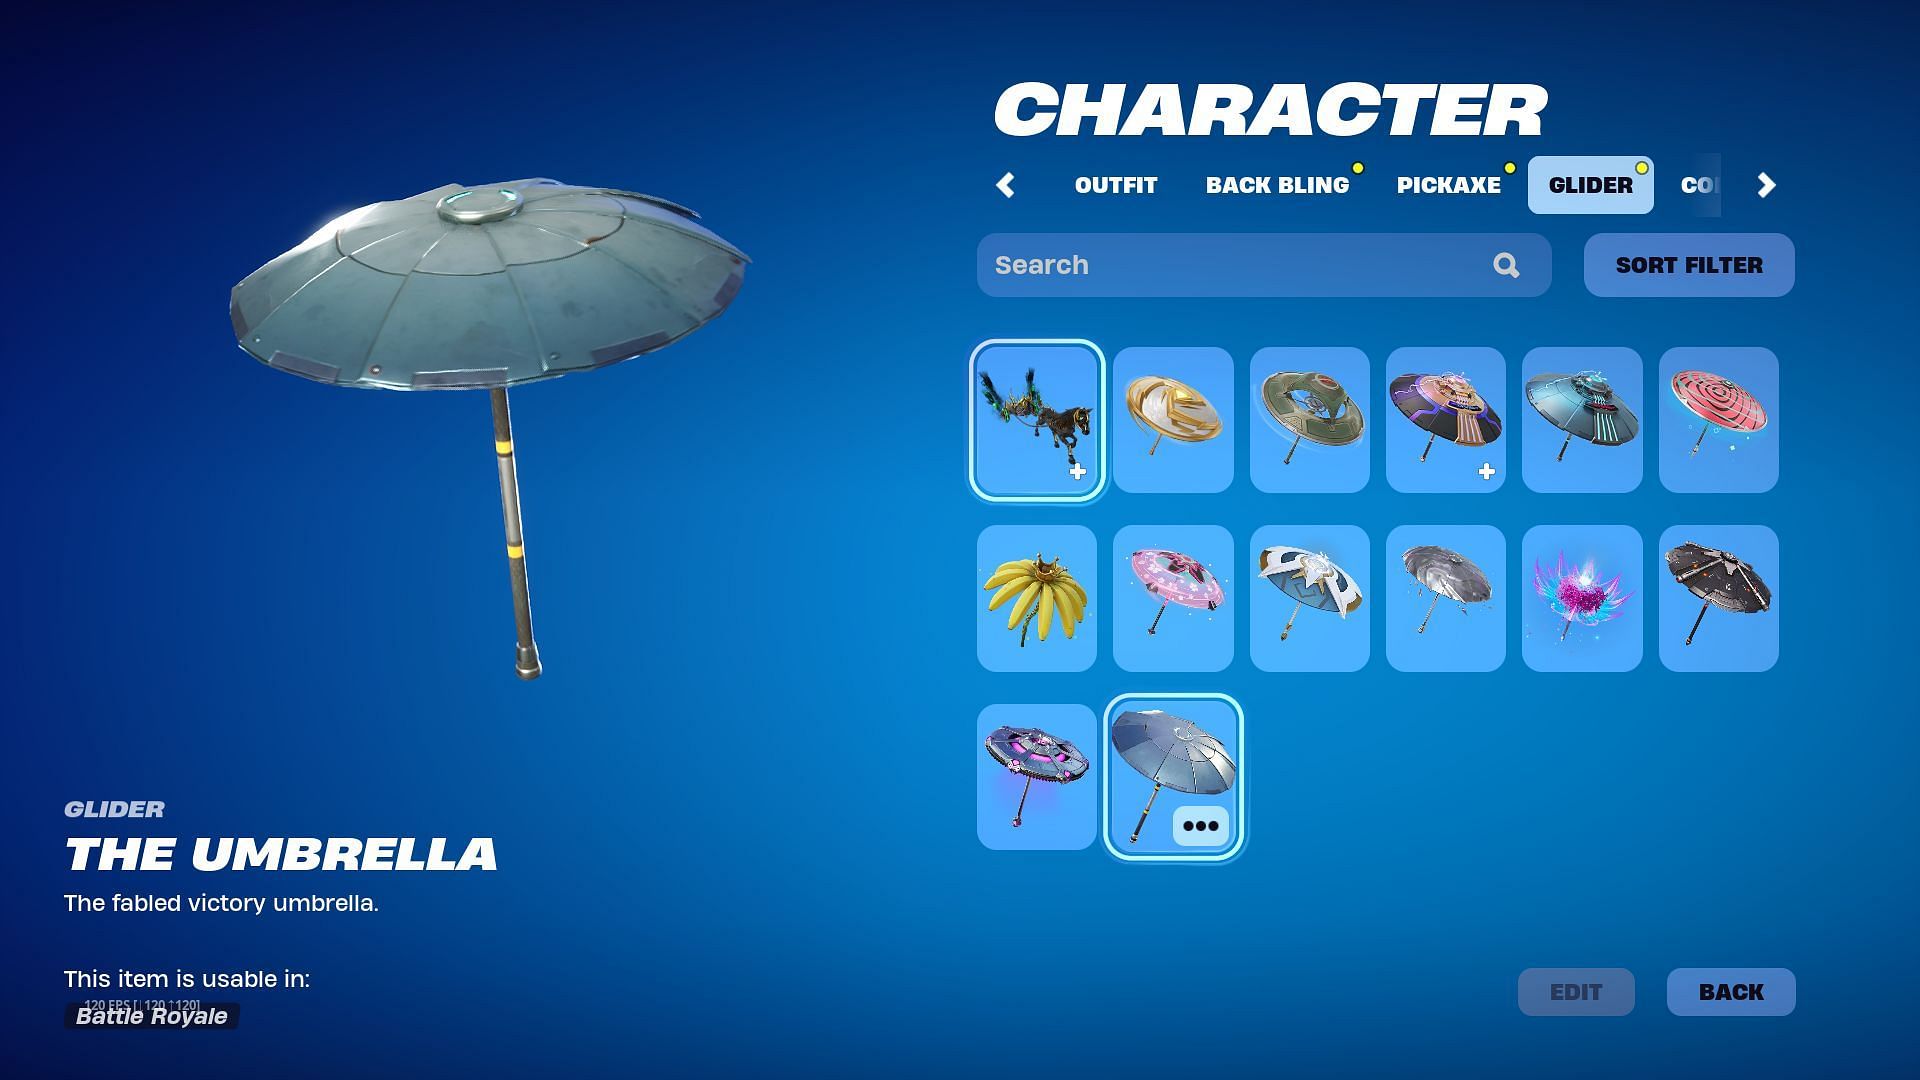 The Umbrella is the first Umbrella gifted to players (Image via Epic Games)